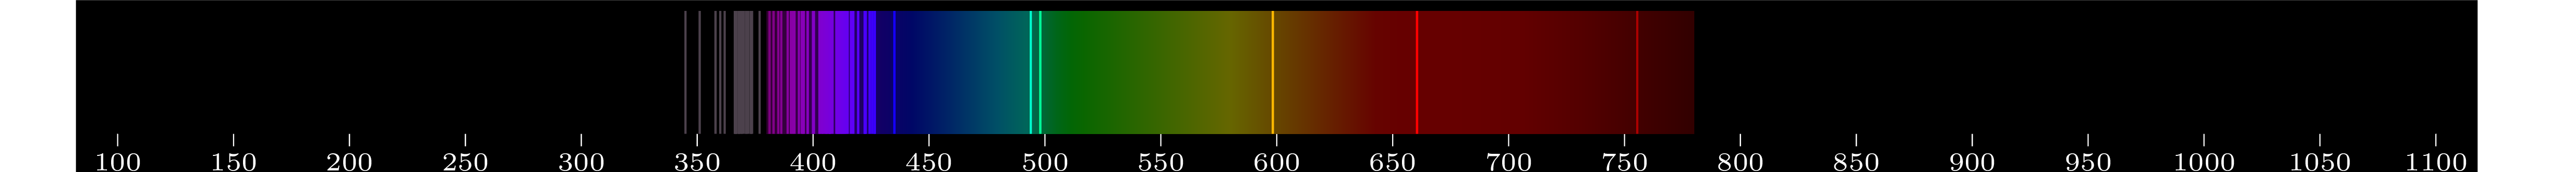 emmision spectra of element Ho